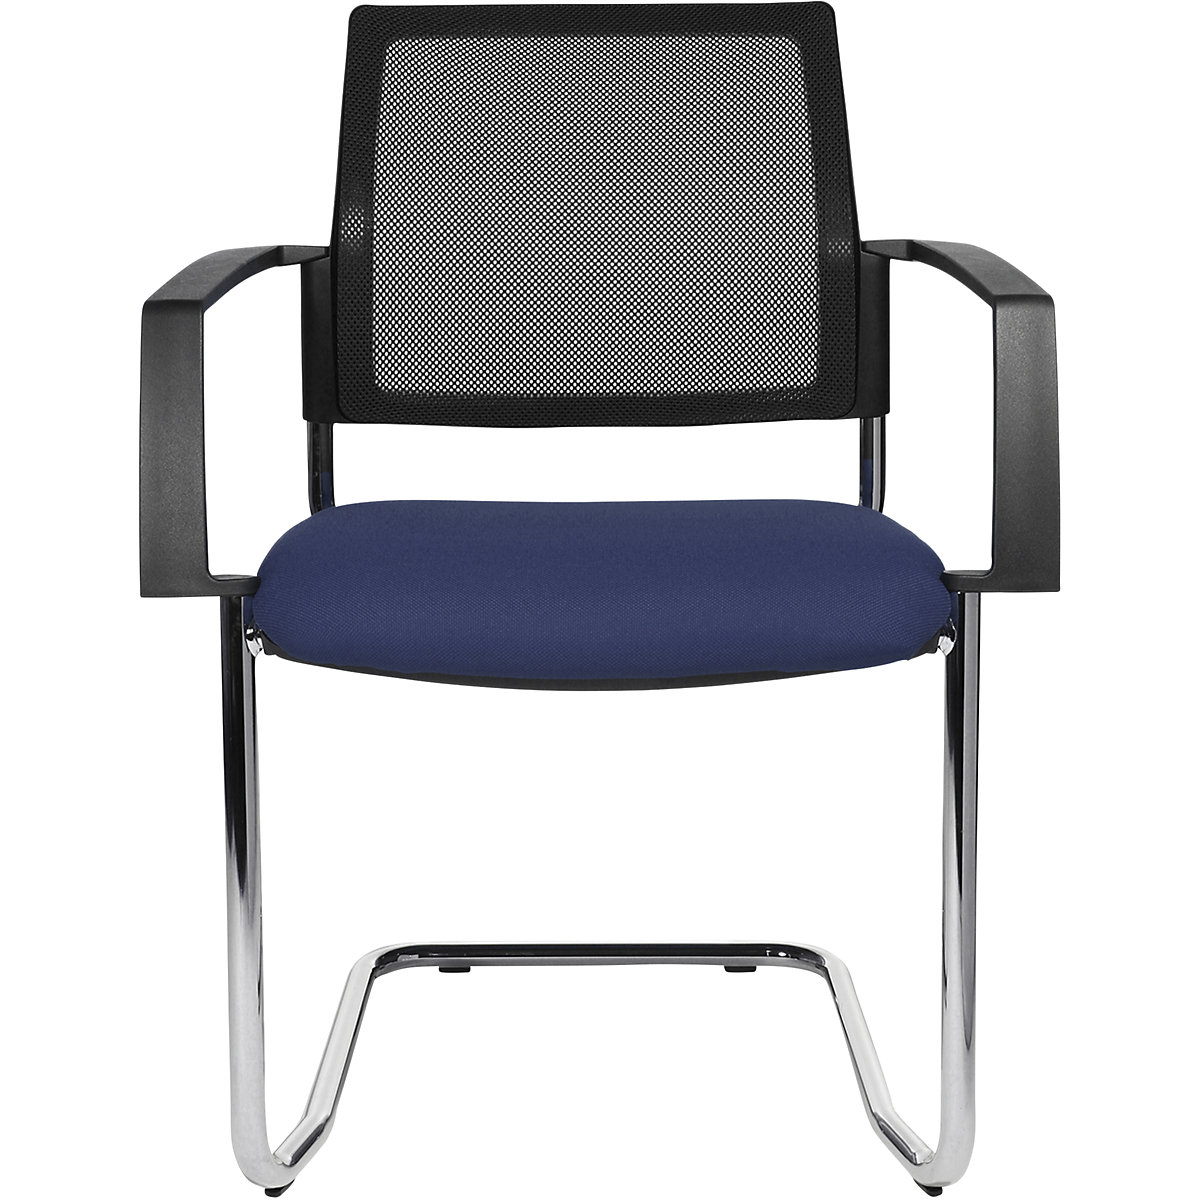 Mesh stacking chair – Topstar, cantilever chair, pack of 2, blue seat, chrome frame-7